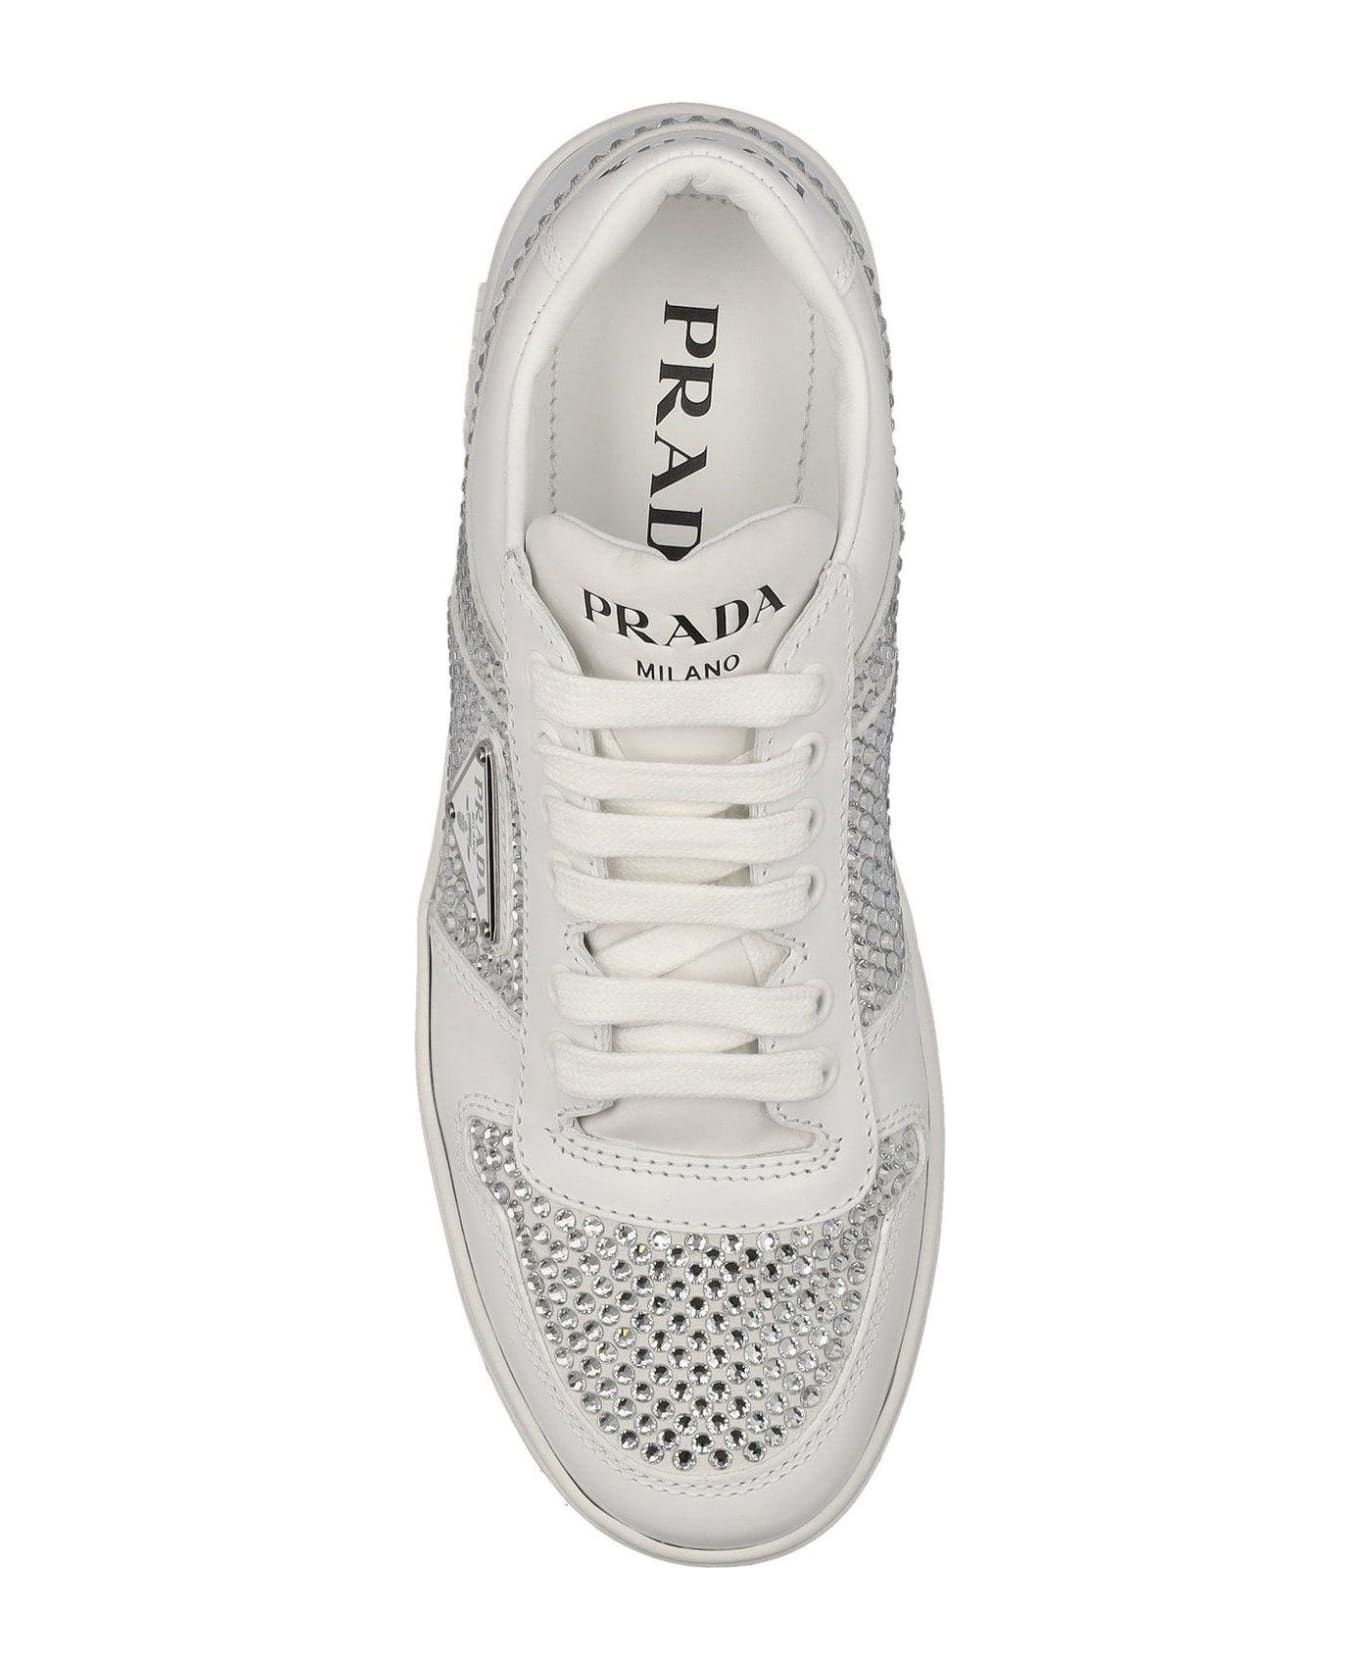 Prada Embellished Lace-up Sneakers